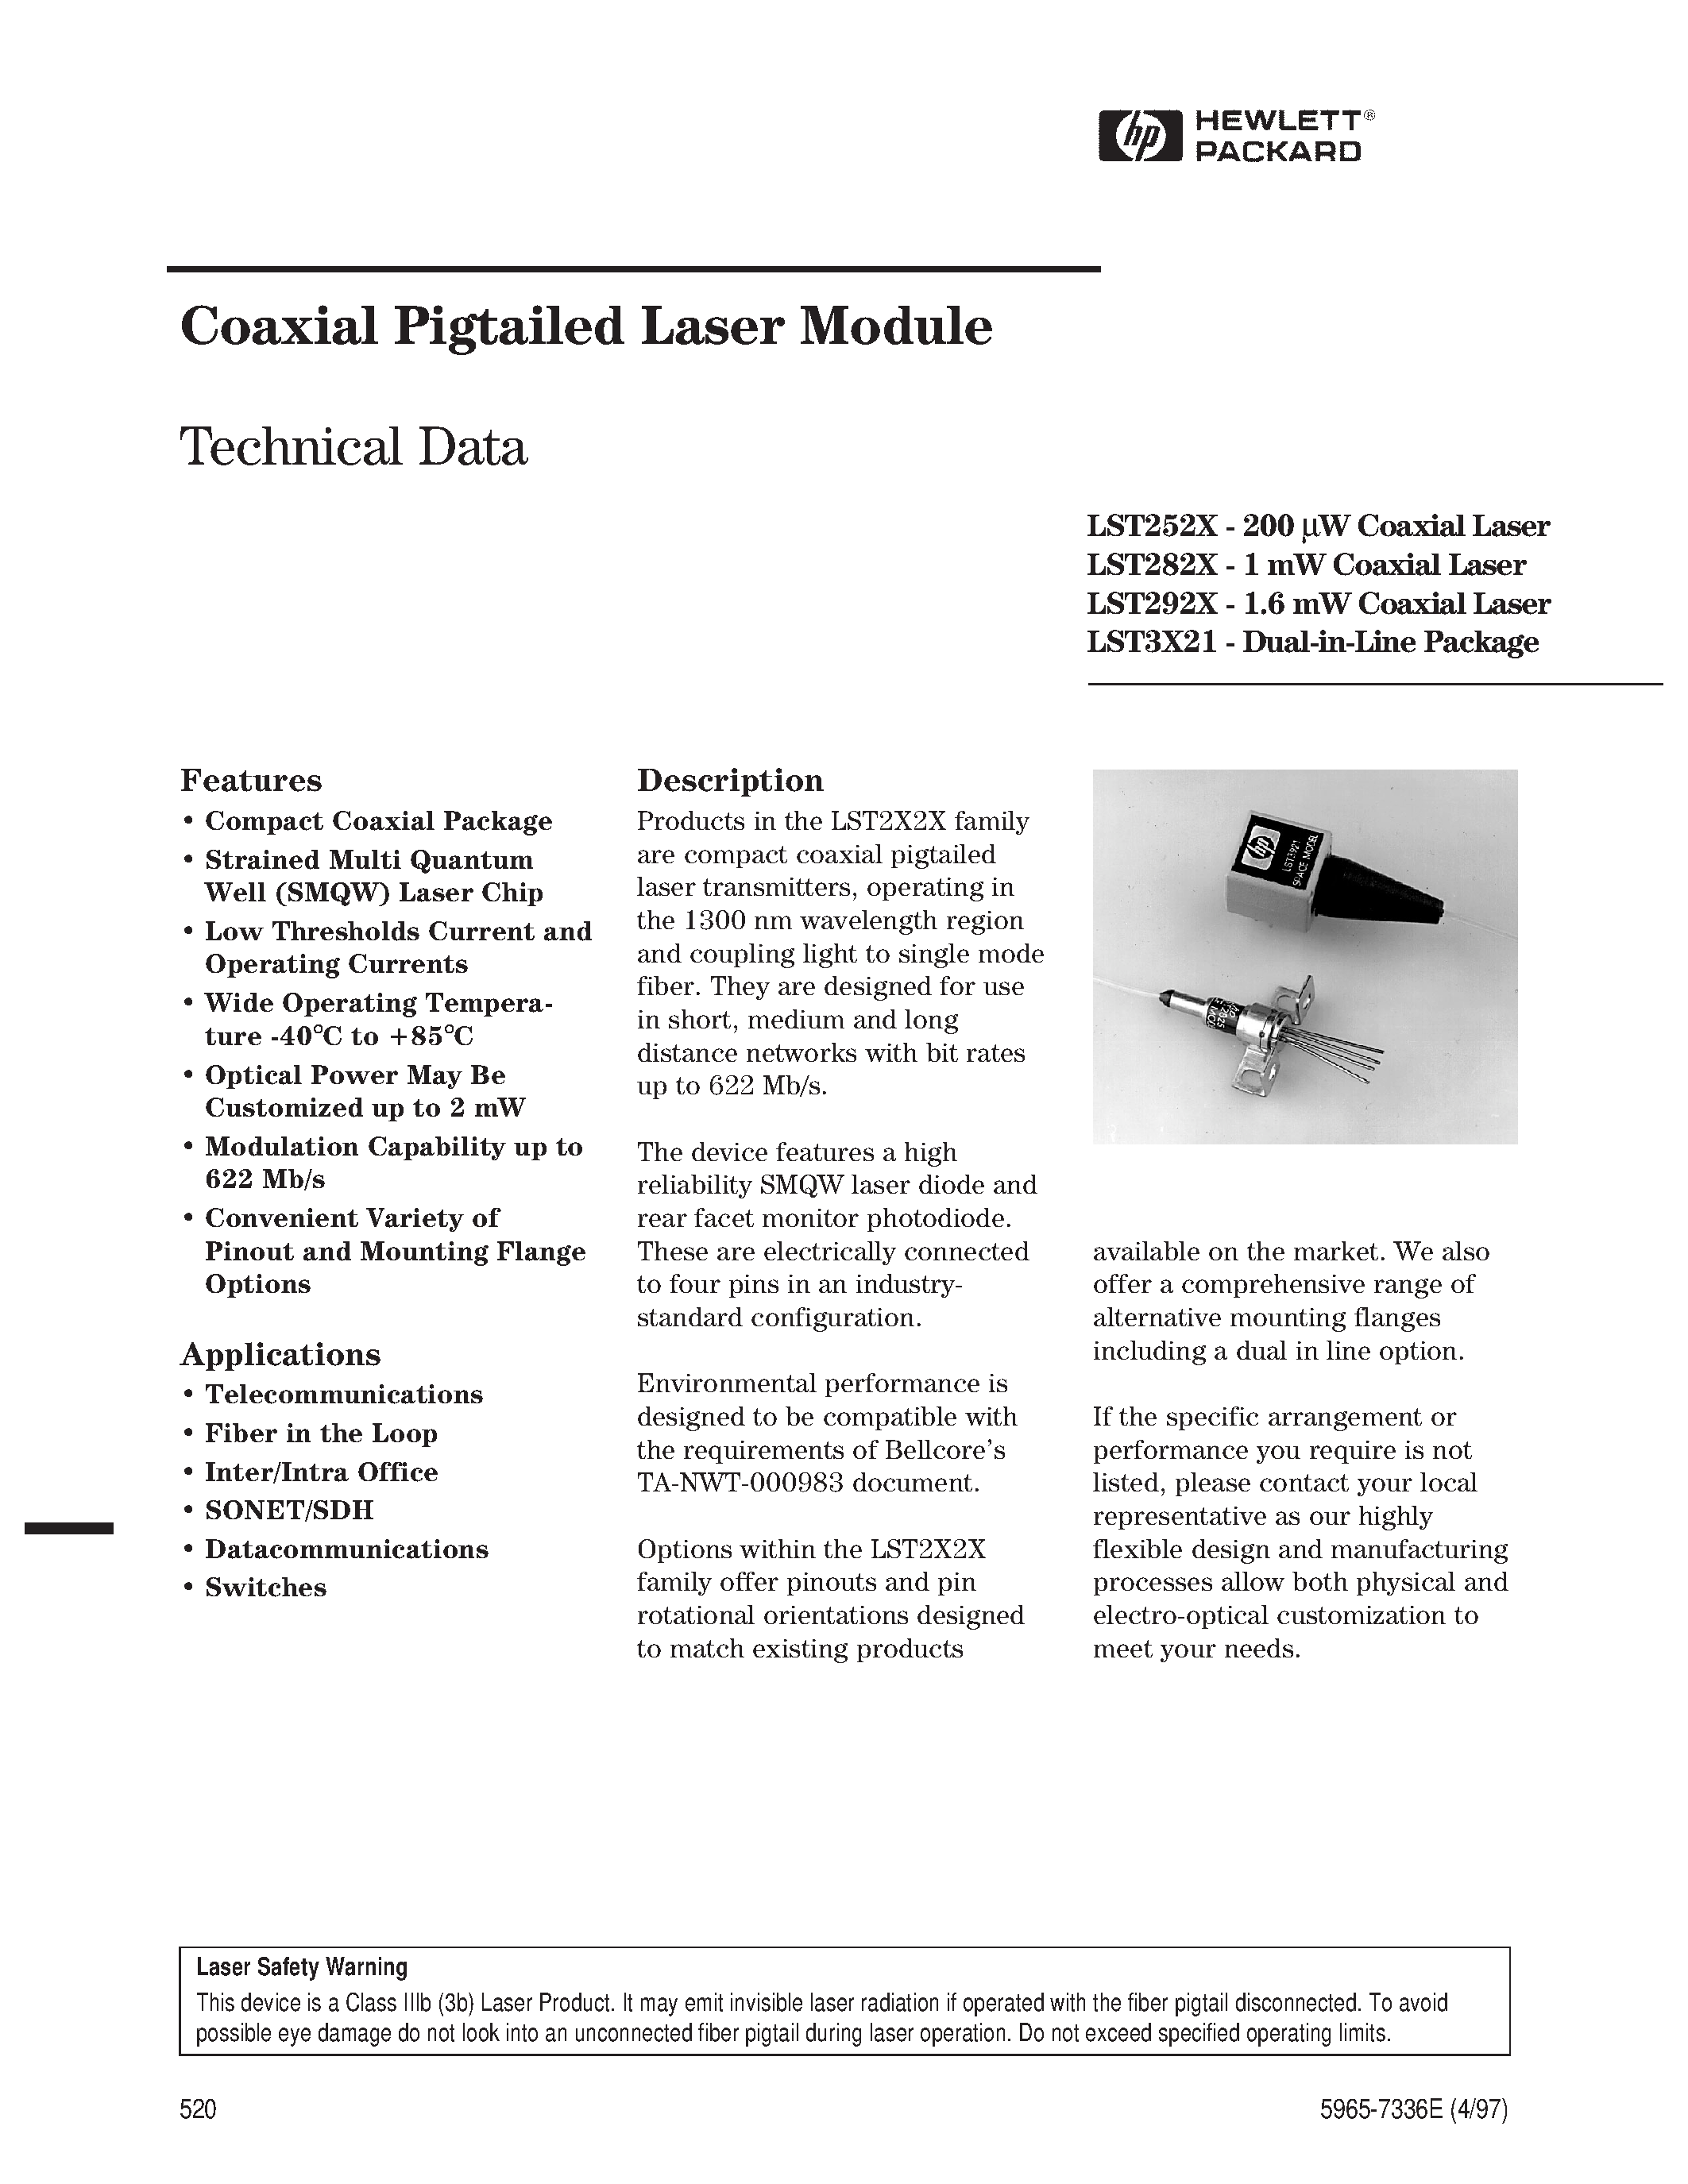 Даташит LST2525-S4-B-ST - Coaxial Pigtailed Laser Module страница 1